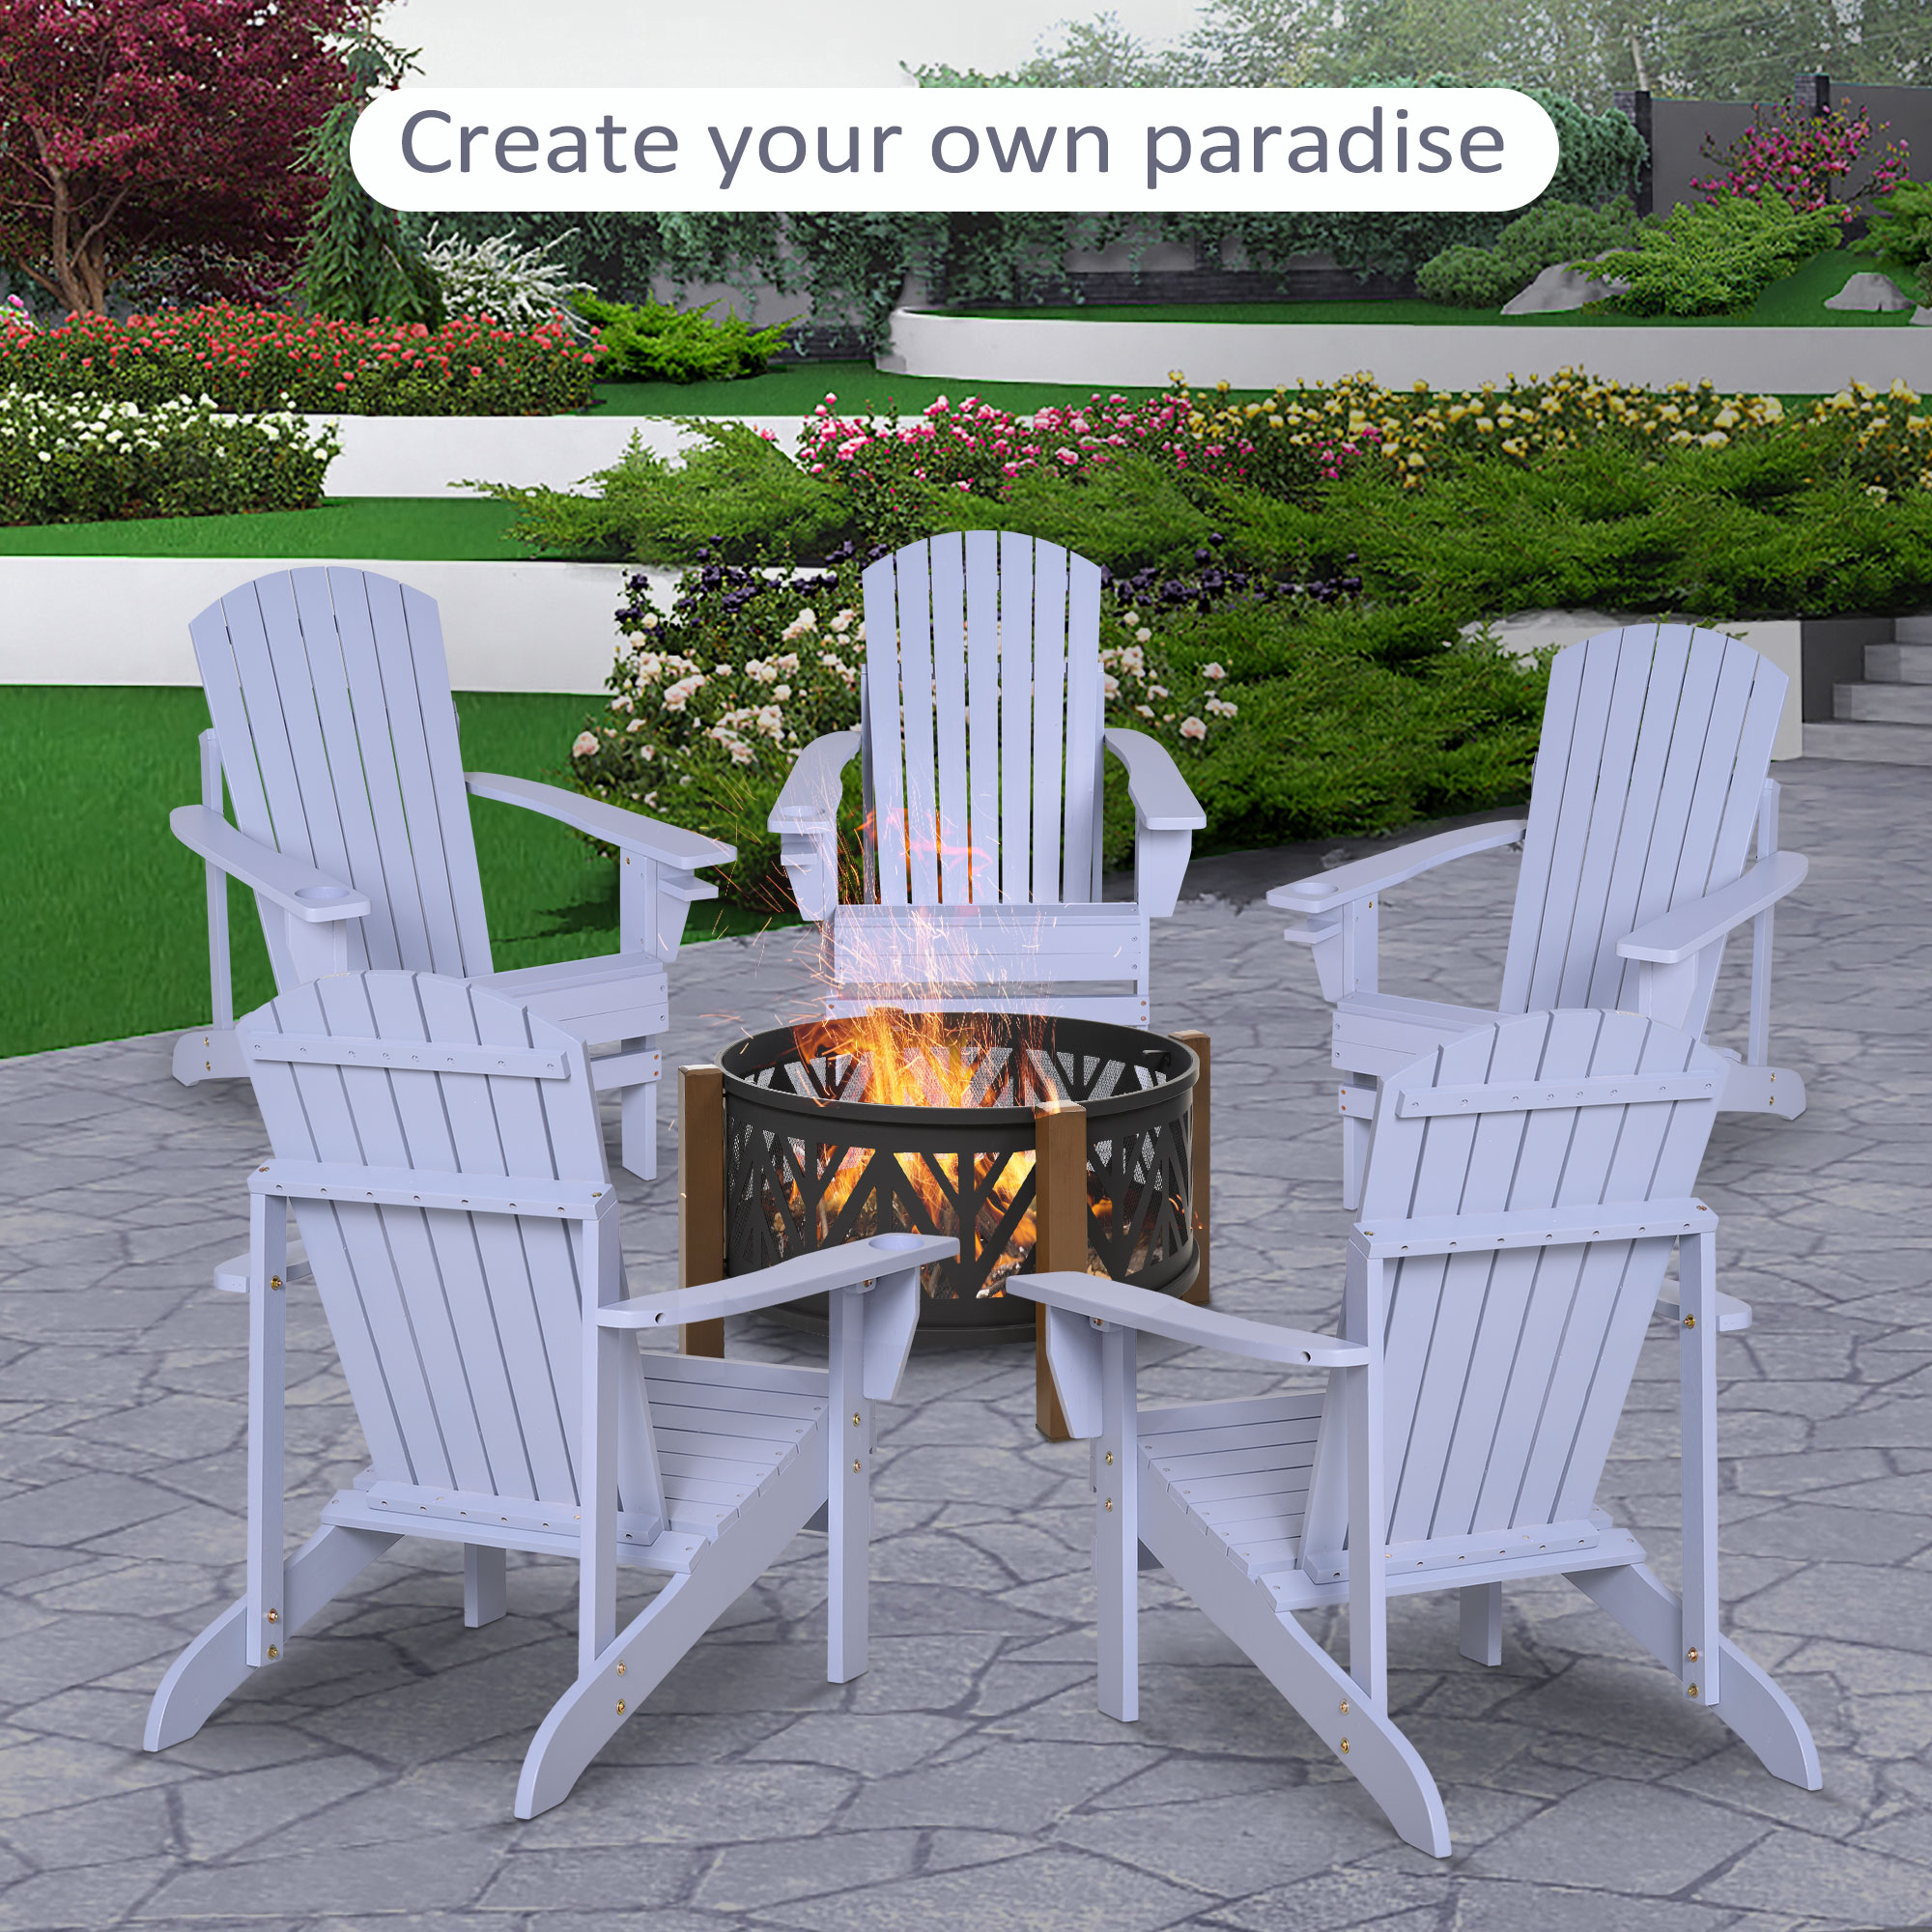 Outsunny Wooden Adirondack Chair, Outdoor Patio Lawn Chair with Cup Holder, Weather Resistant Lawn Furniture, Classic Lounge for Deck, Garden, Backyard, Fire Pit, Gray - image 3 of 9